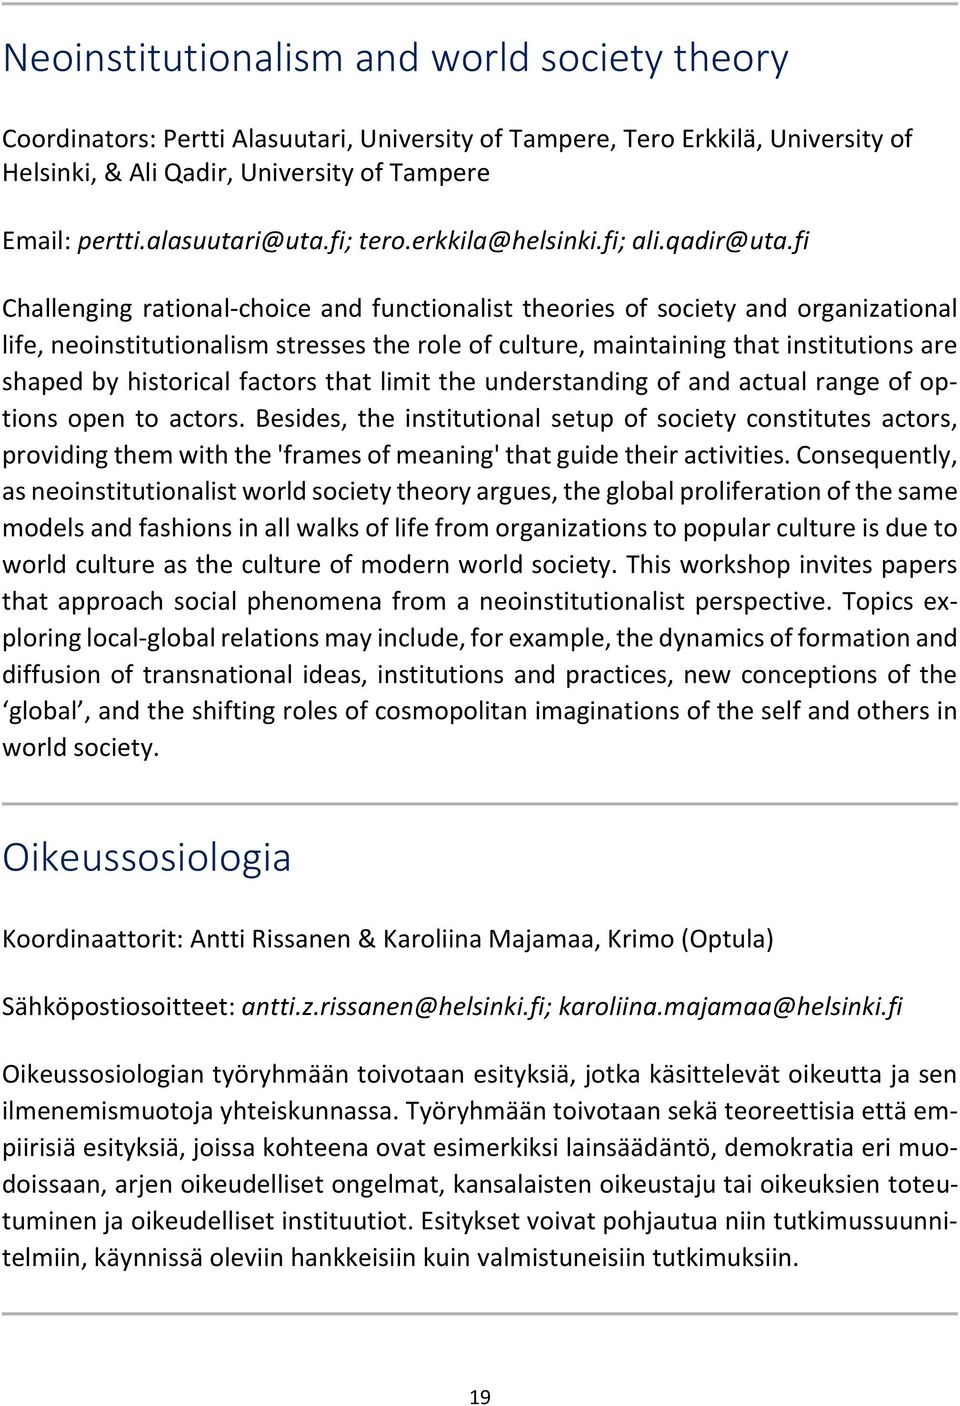 fi Challenging rational-choice and functionalist theories of society and organizational life, neoinstitutionalism stresses the role of culture, maintaining that institutions are shaped by historical